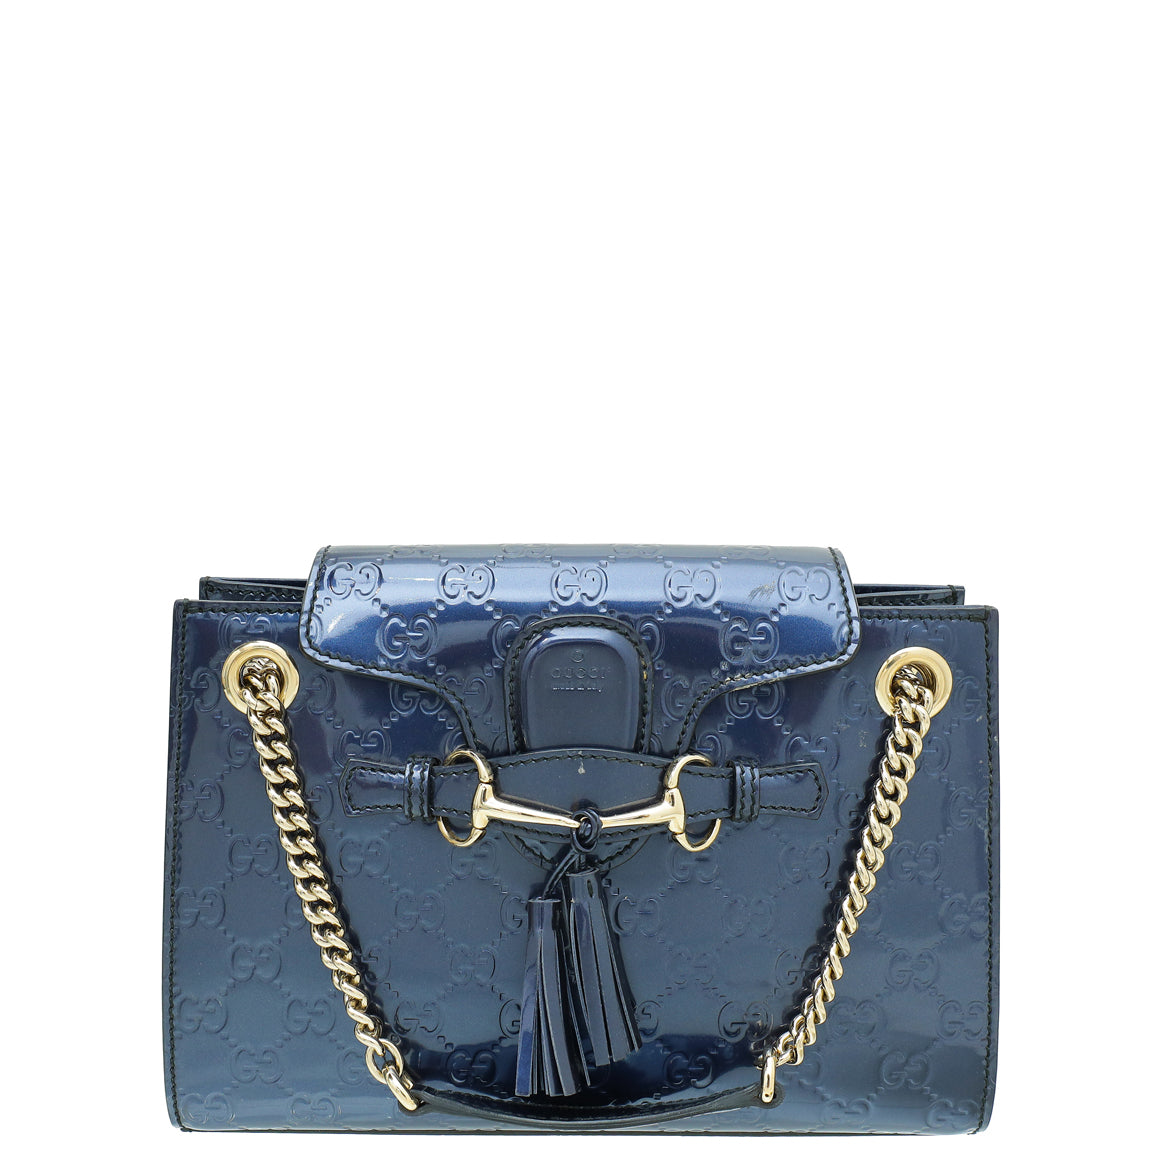 Gucci Navy Blue GG Guccissima Emily Small Shoulder Bag